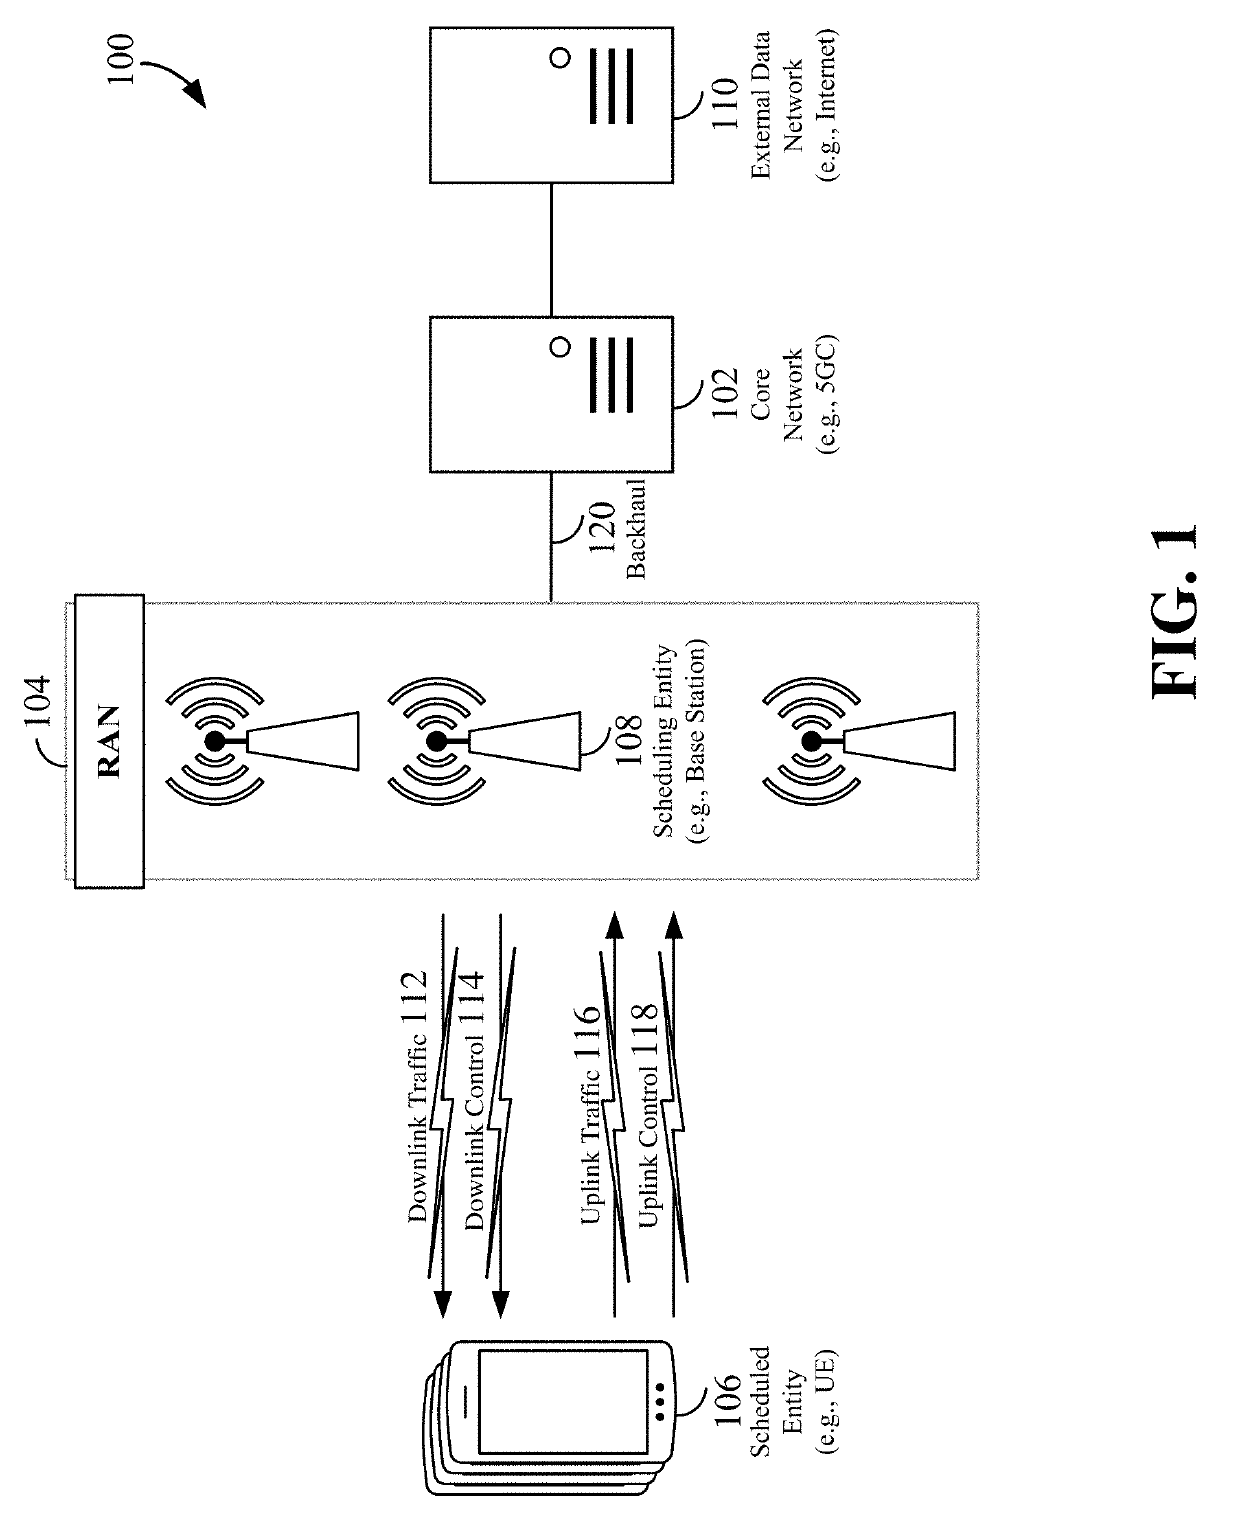 Resource allocation for the physical uplink control channel